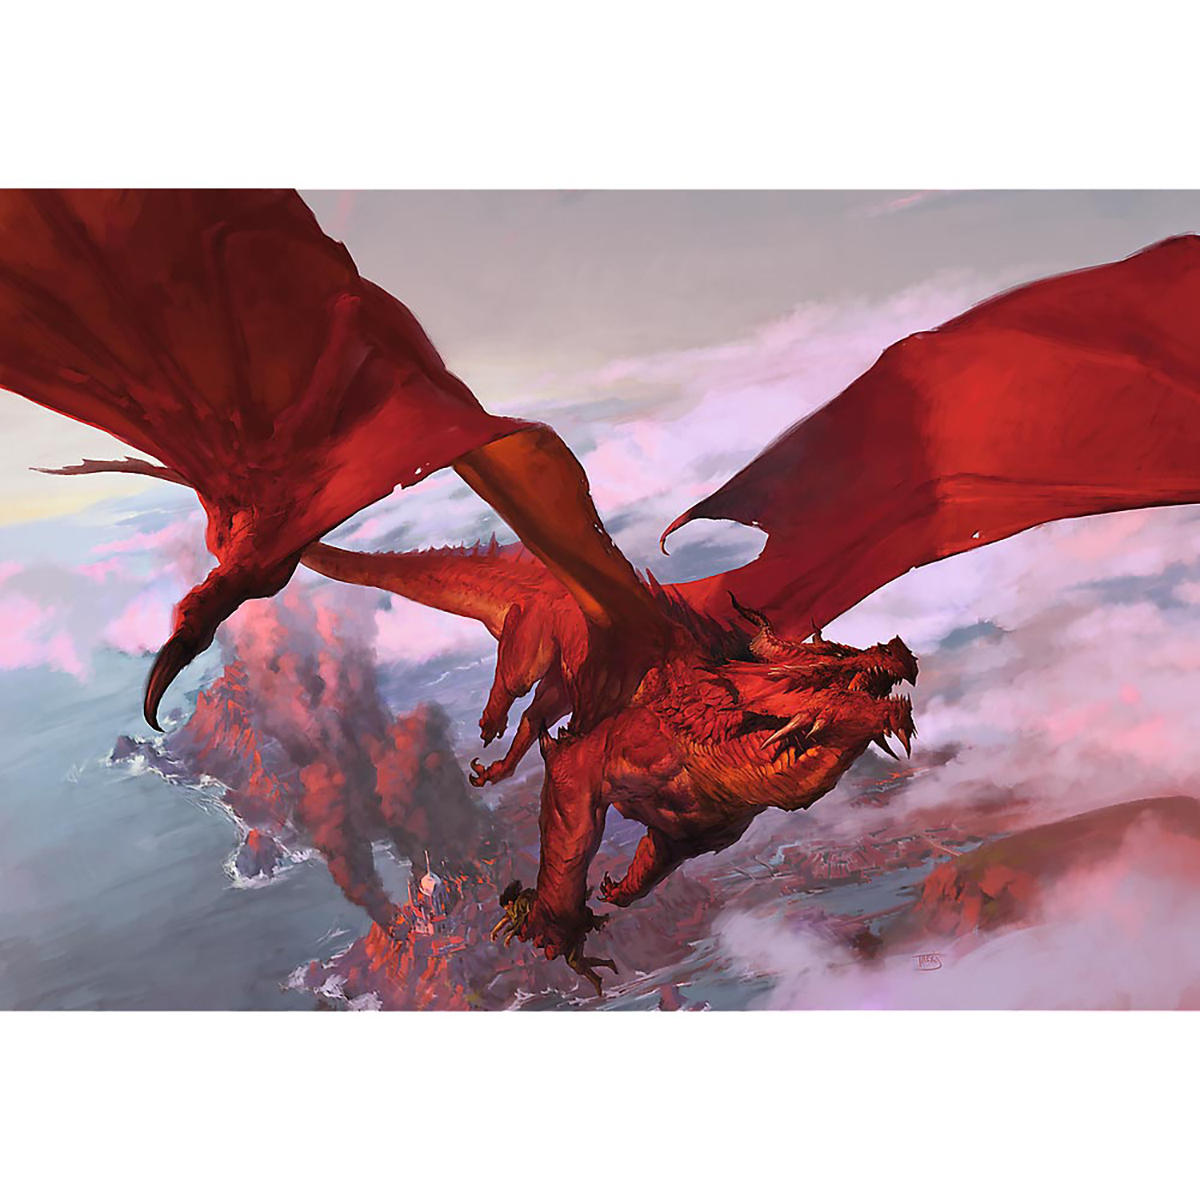 TREFL Dungeons Alter Roter & Puzzle Drache Dragons